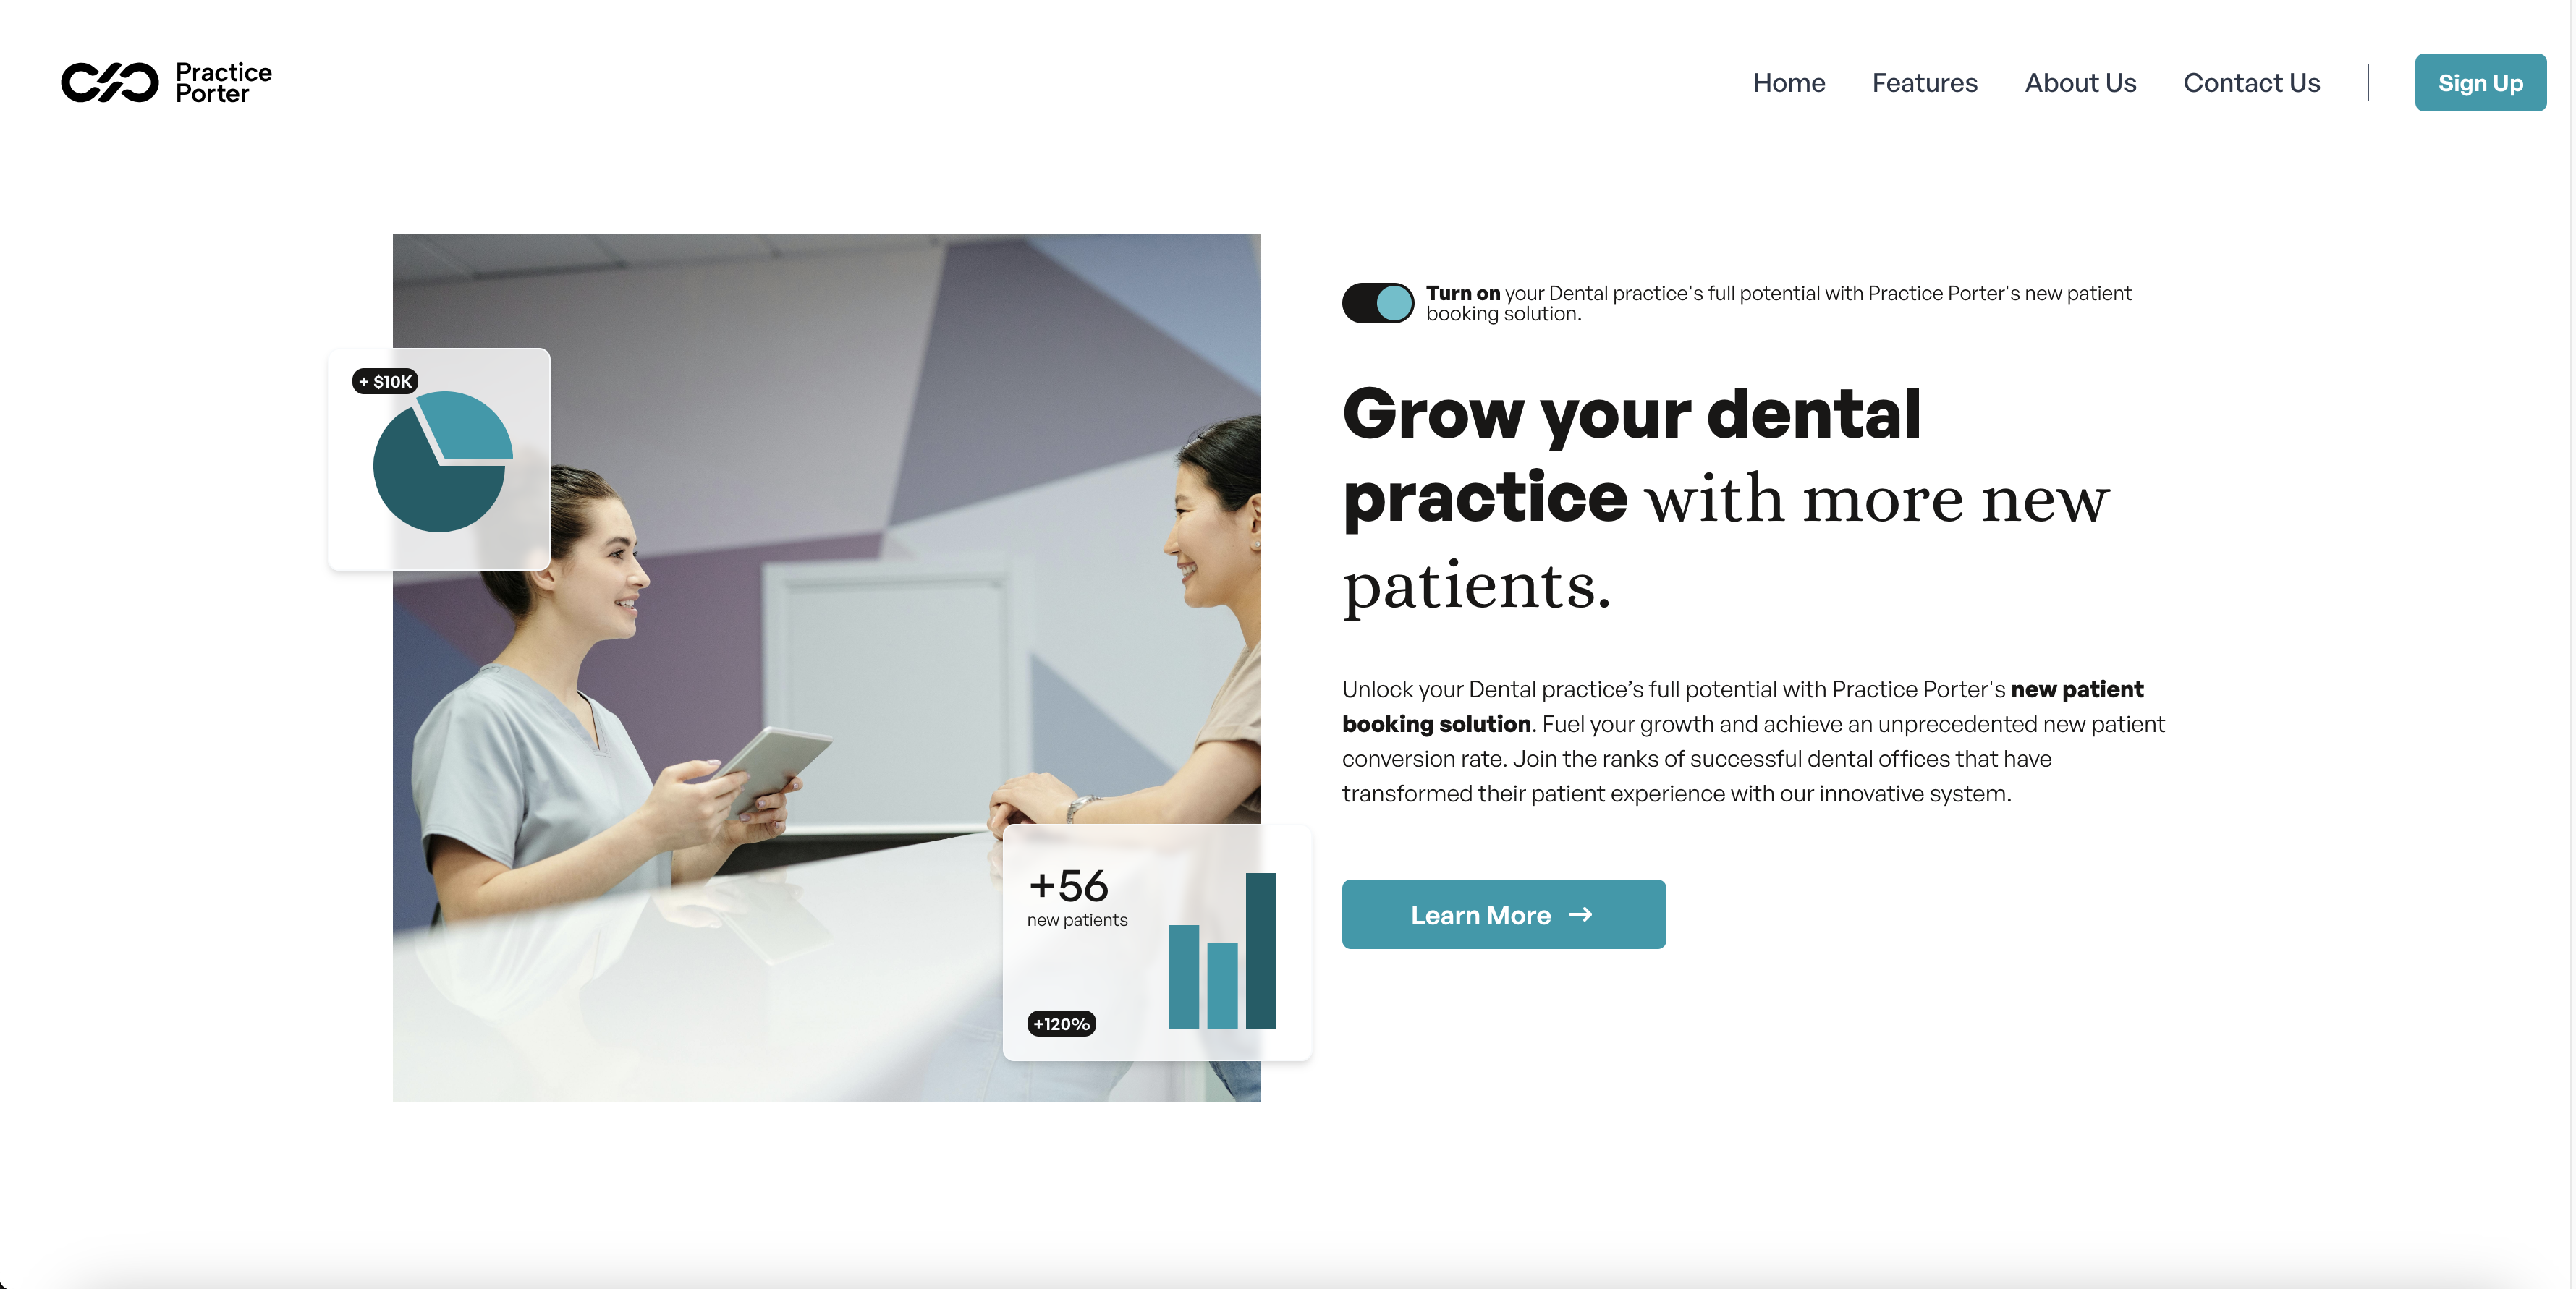 Designed and developed the landing page for Practice Porter, a web platform aimed at enhancing the efficiency of medical practice management. This project showcases a compelling introduction to the service, focusing on user engagement and clear presentation of its features and benefits. The application is built with Gatsby, Chakra UI, and Contentful as the CMS.